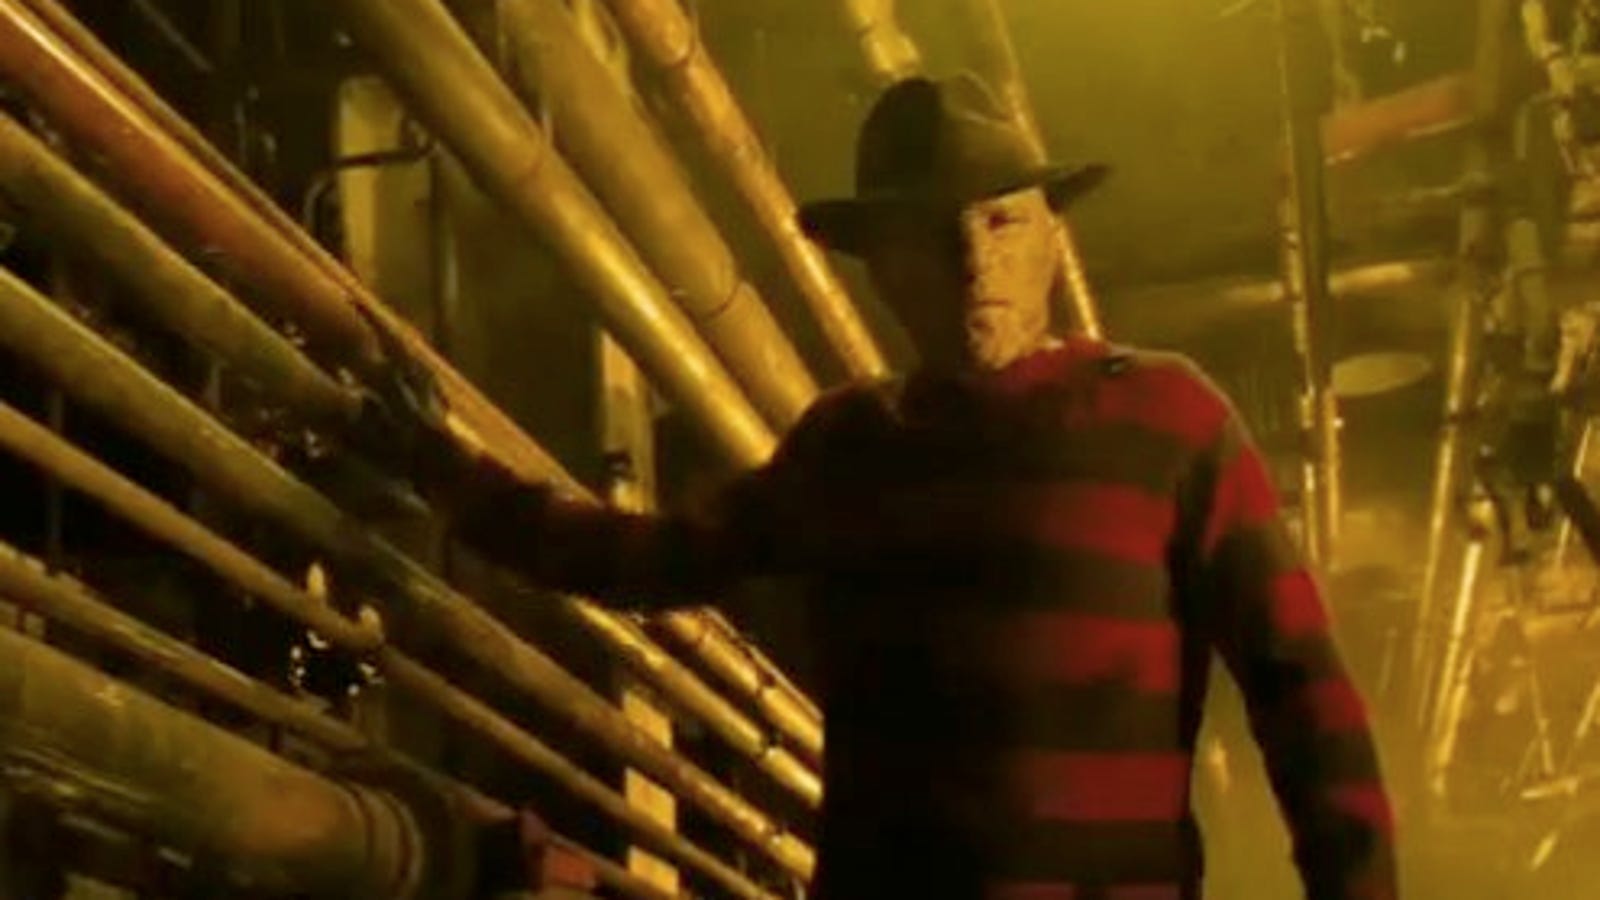 New Freddy Krueger Trailer Gives Us Nightmares, And That's A Good Thing